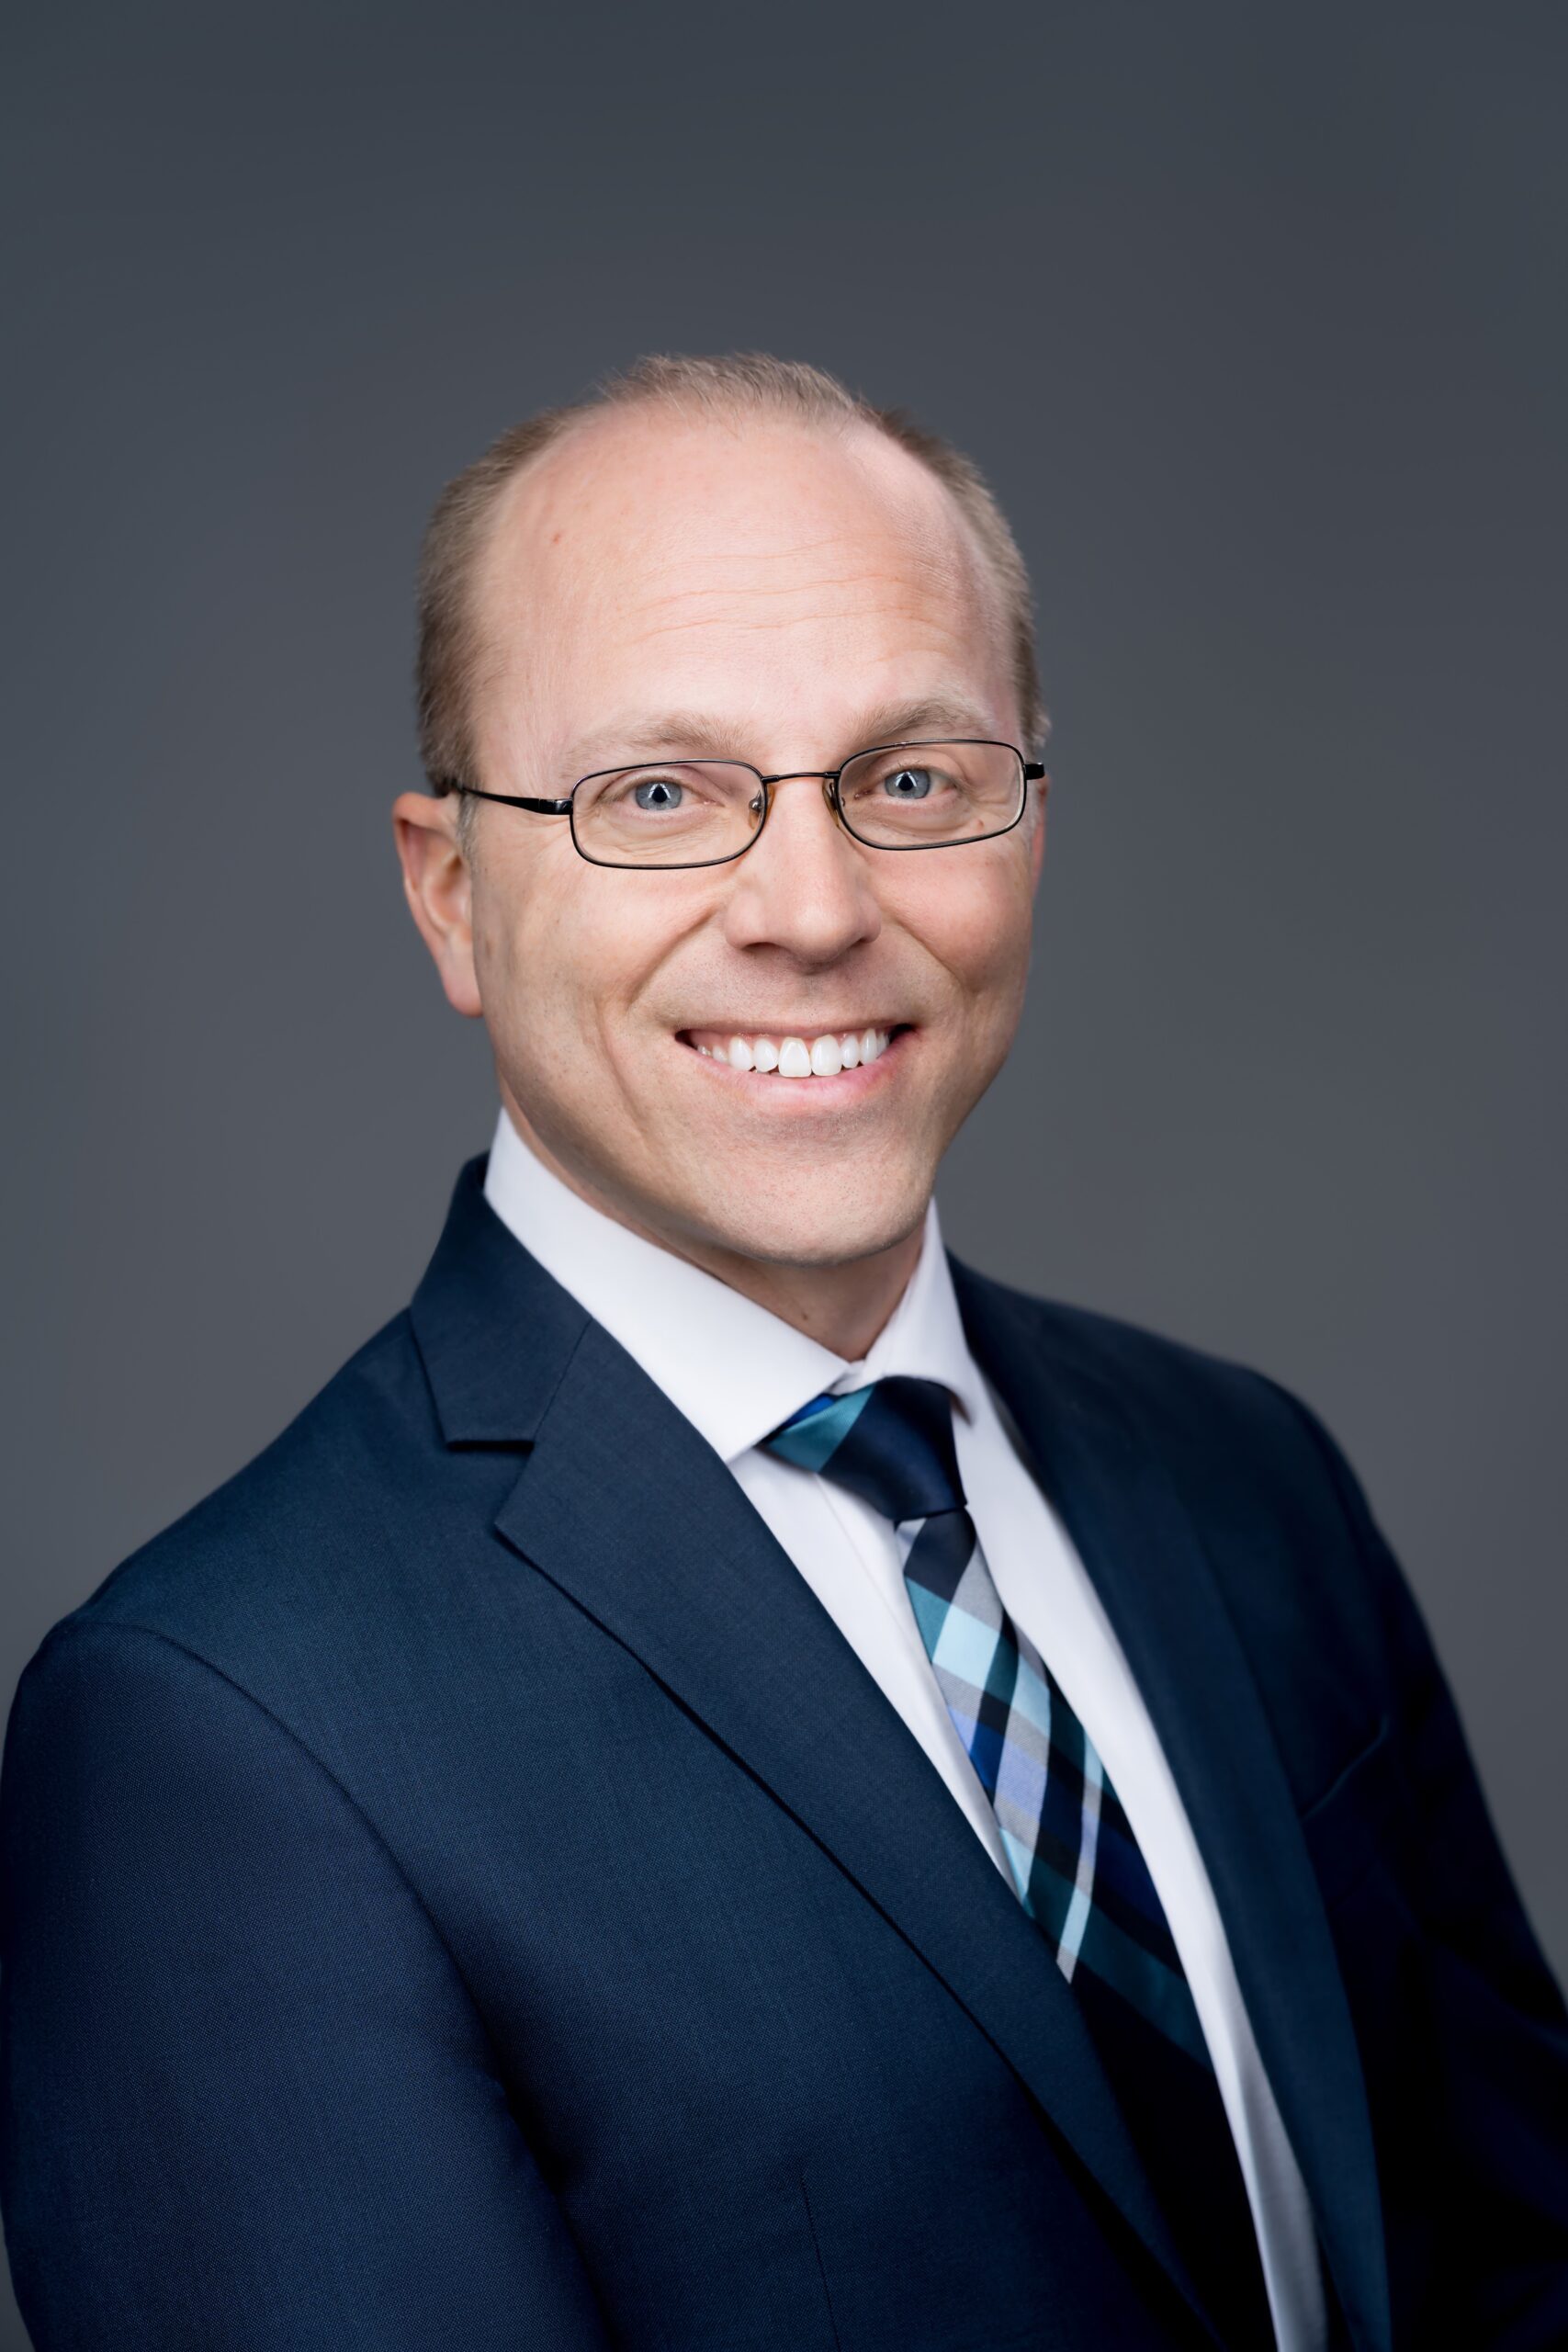 Introducing Eric Witte, DPT, MBA, CPHQ as COO